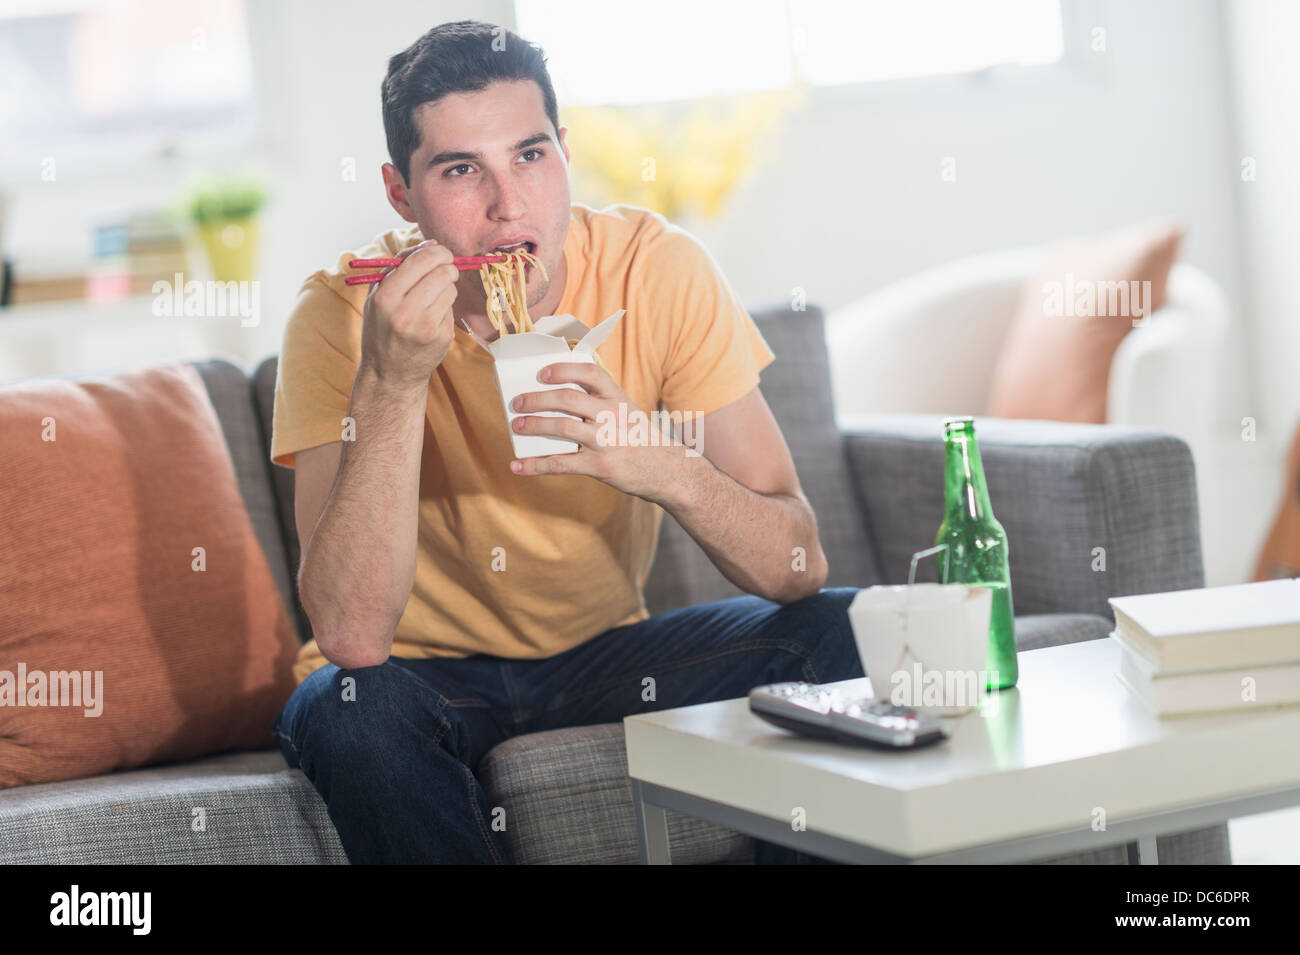 Man eating take out meal and watching television Stock Photo